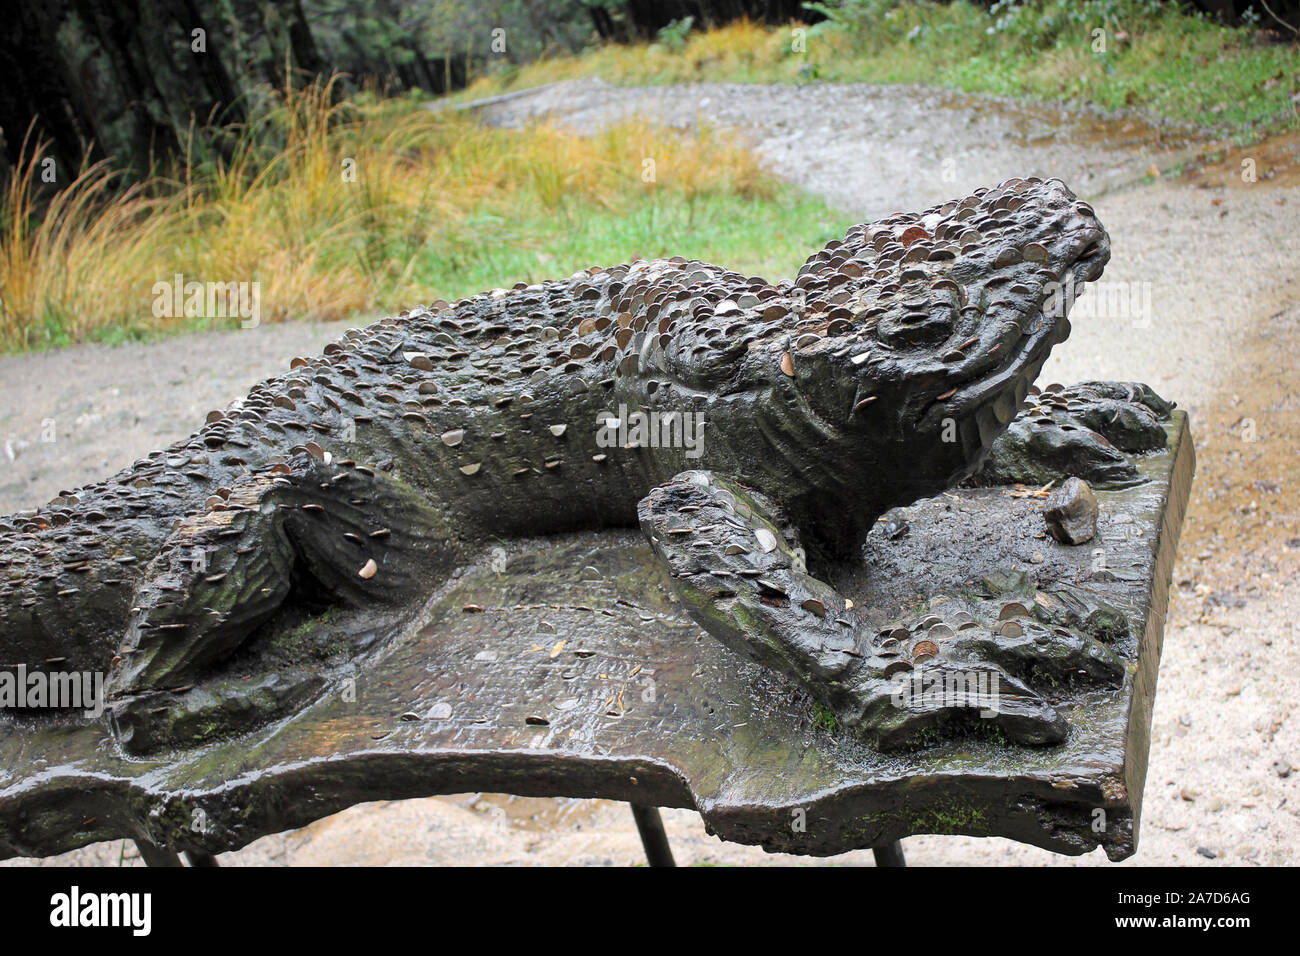 Lizard Sculpture Embedded With Coins, Beacon Fell Country Park, Lancashire, UK Stock Photo